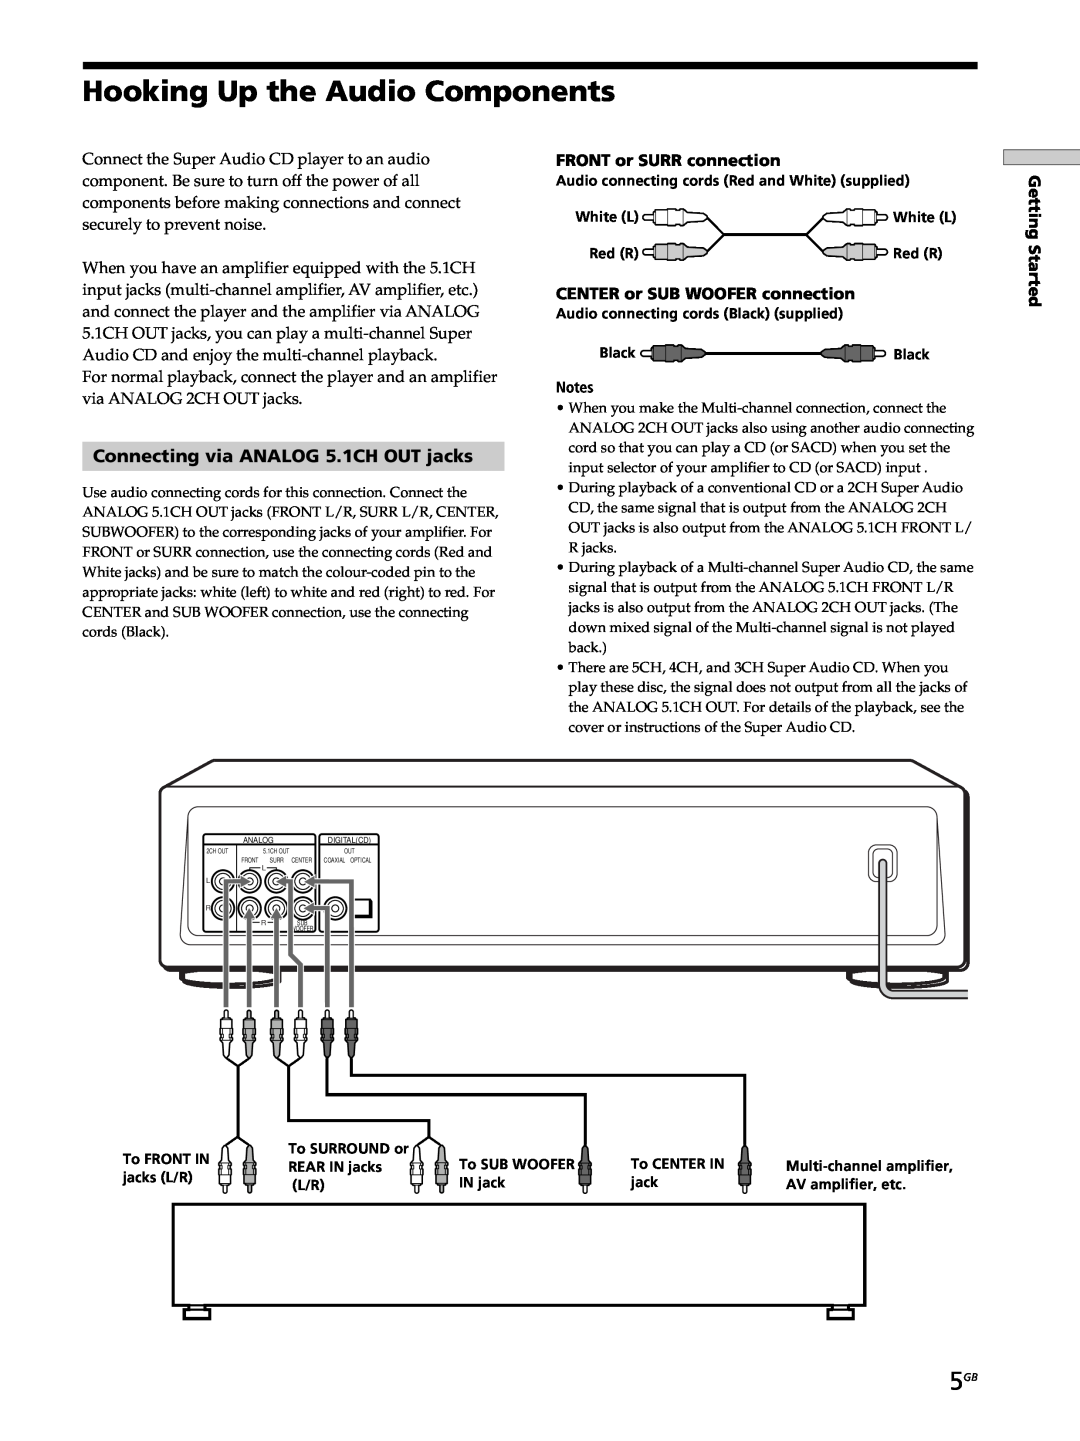 Sony SCD-XB770 operating instructions Hooking Up the Audio Components, Connecting via ANALOG 5.1CH OUT jacks 